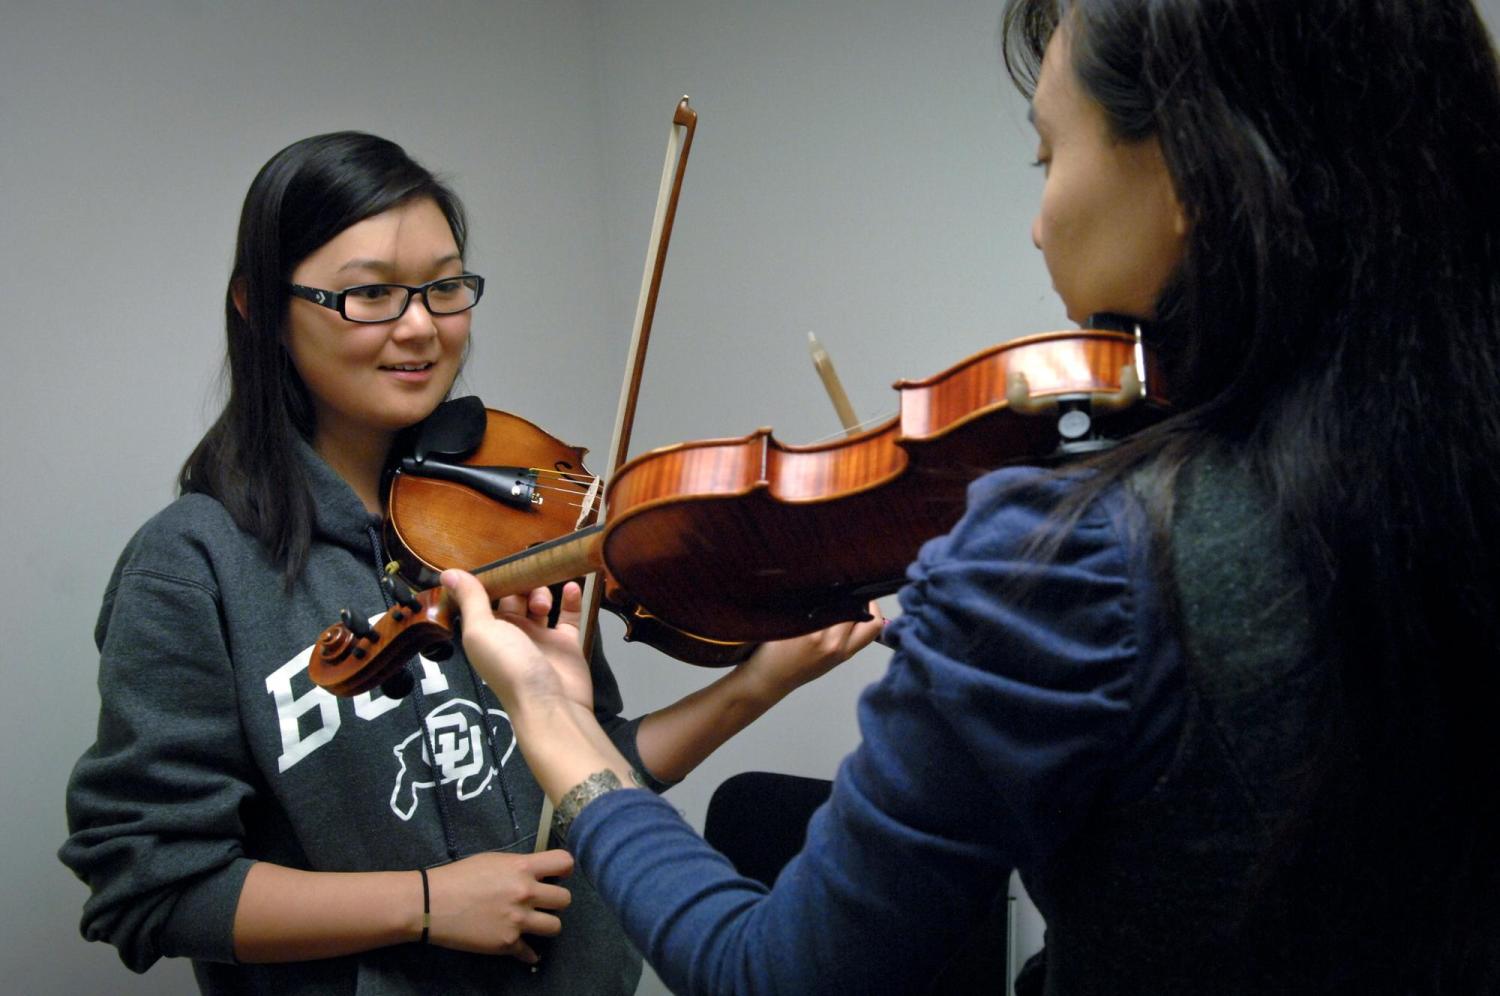 A violin student watches as her teacher demonstrates on her violin